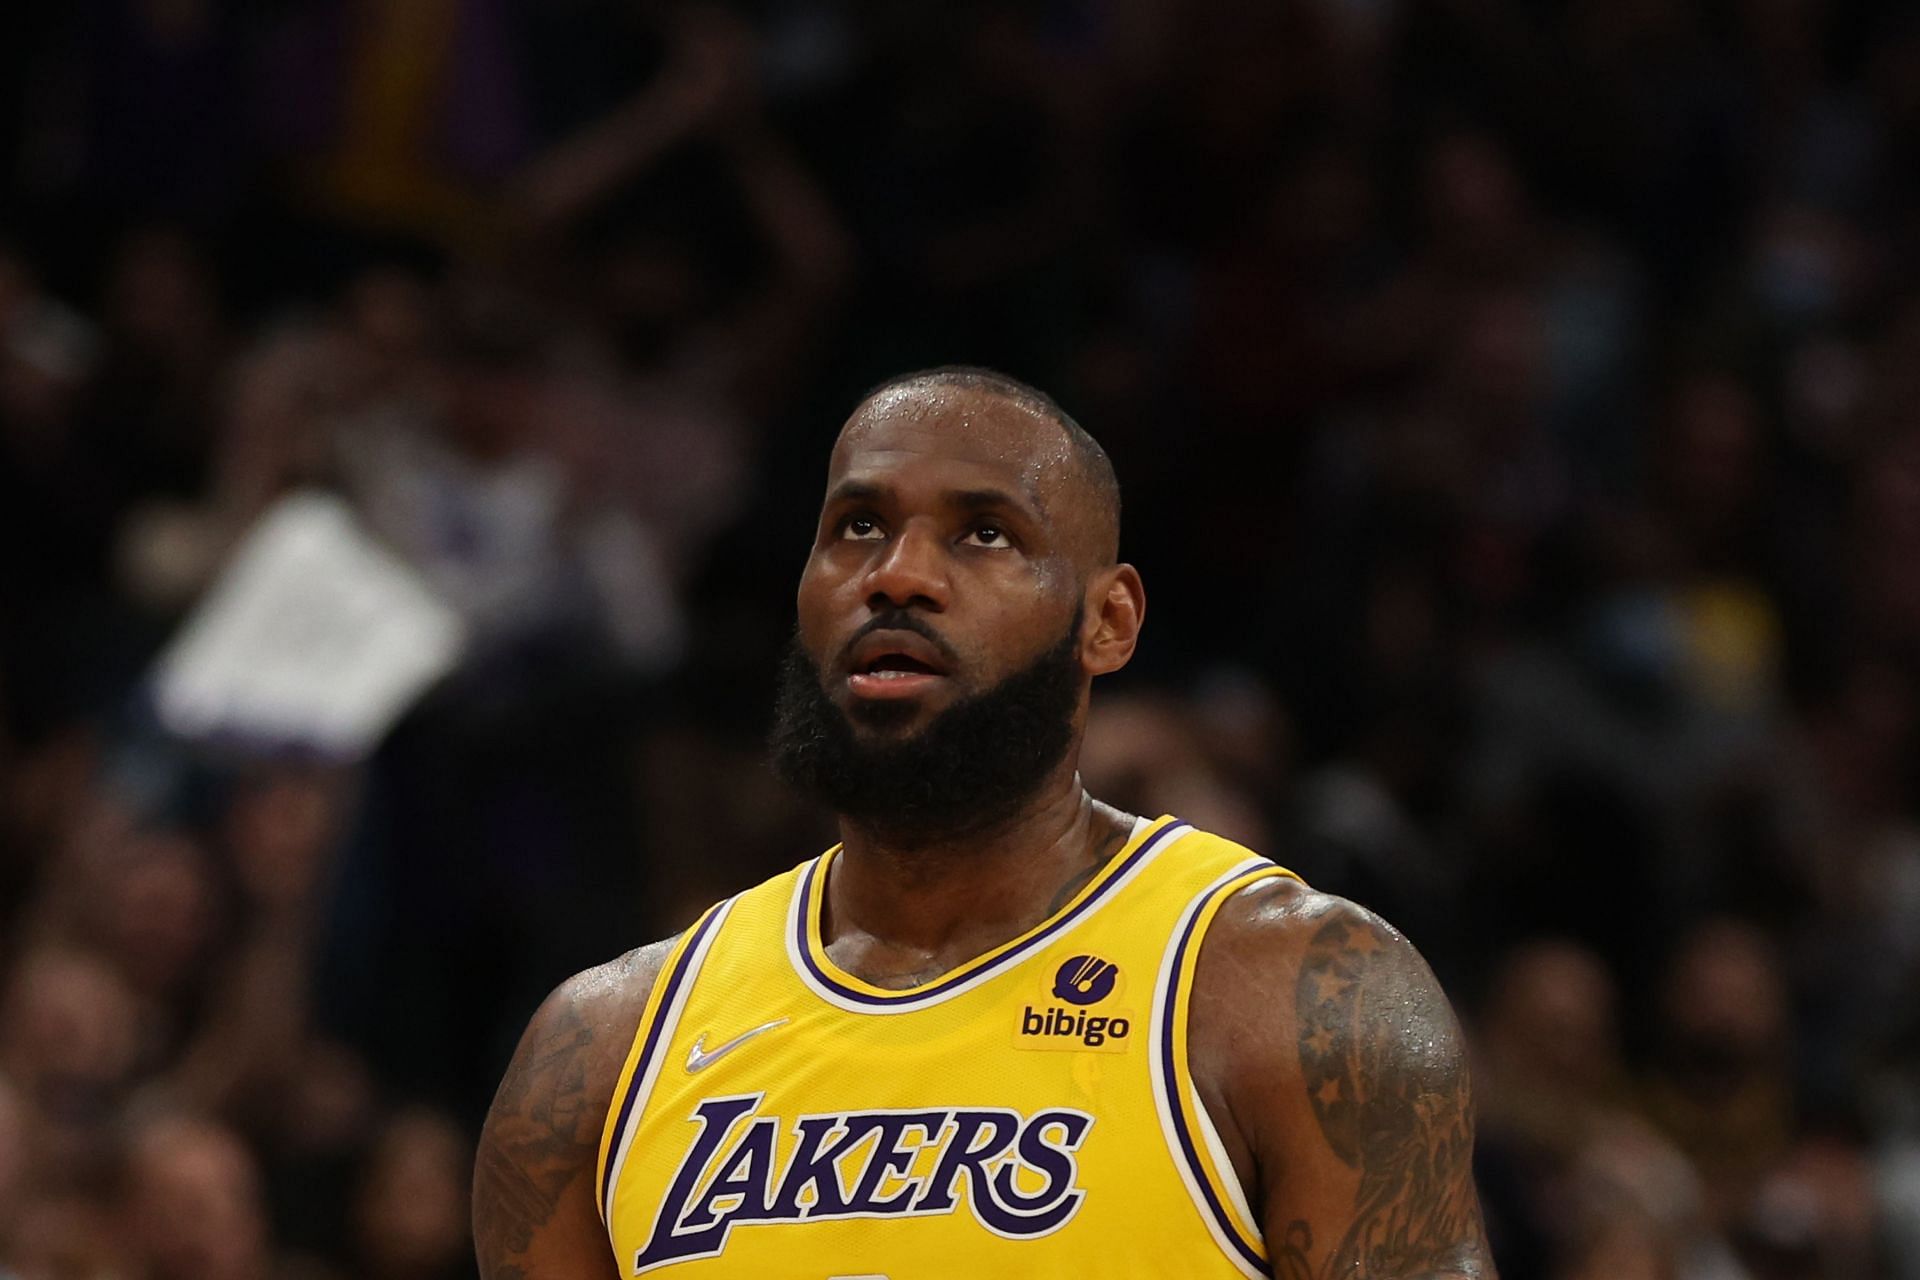 Los Angeles Lakers vs. Washington Wizards; LeBron reacts after scoring.